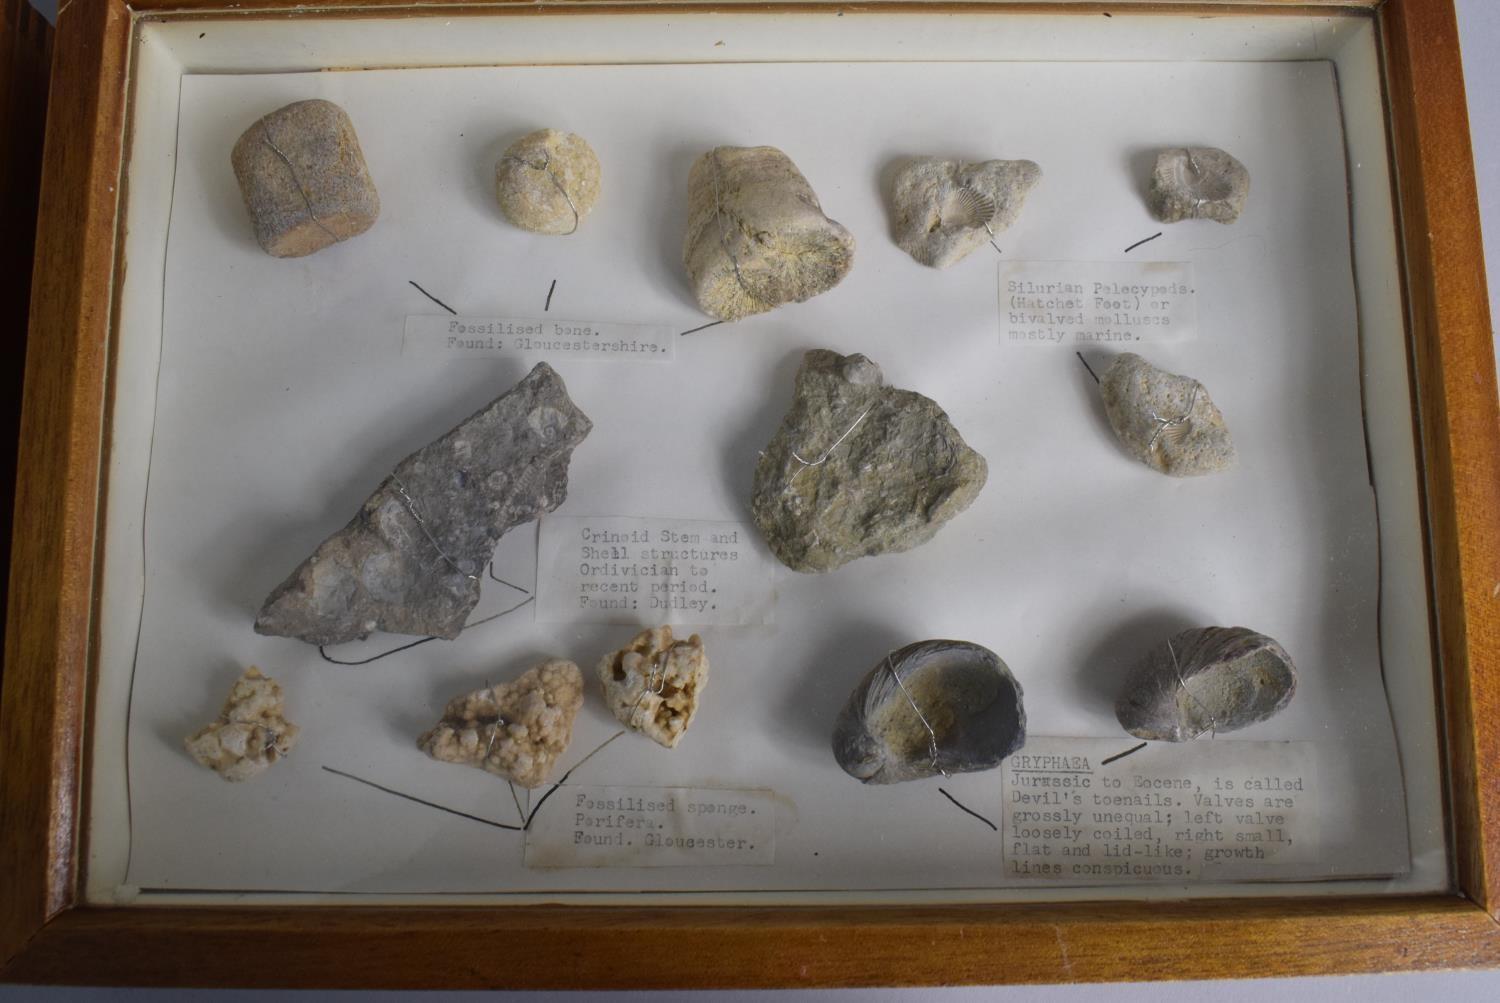 A Cased Table Top Pair of Display Cabinets Containing Fossils From the Silurian Period. Each 35x25. - Image 3 of 3